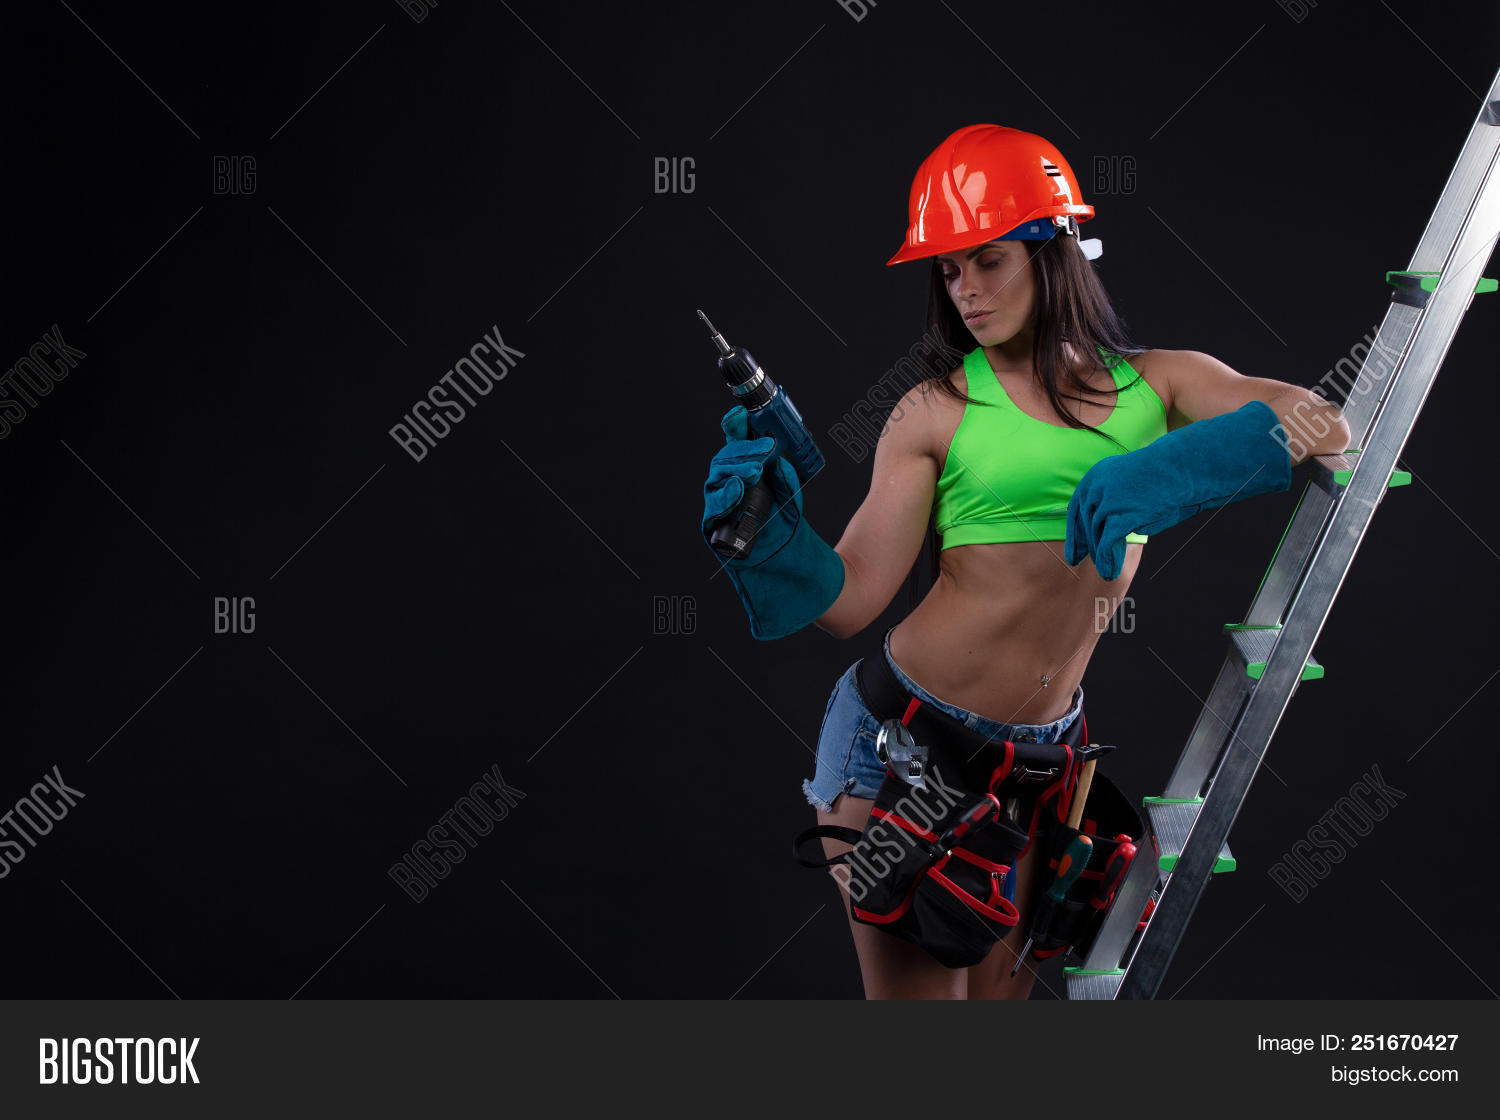 ahmeem ahmed add sexy female construction worker photo